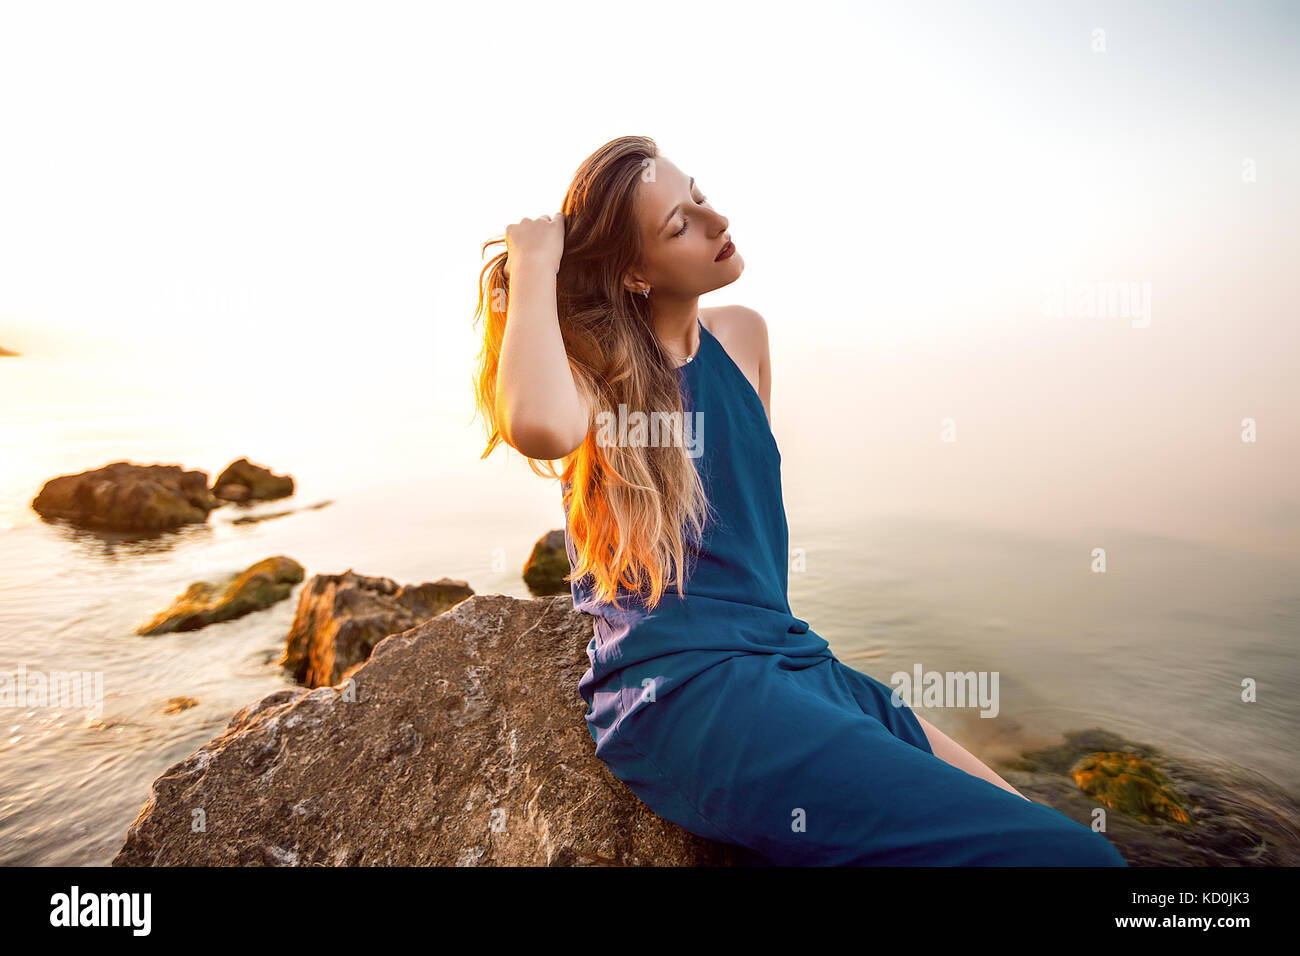 Young woman sitting on beach rock with hand in long hair, Odessa, Ukraine Stock Photo